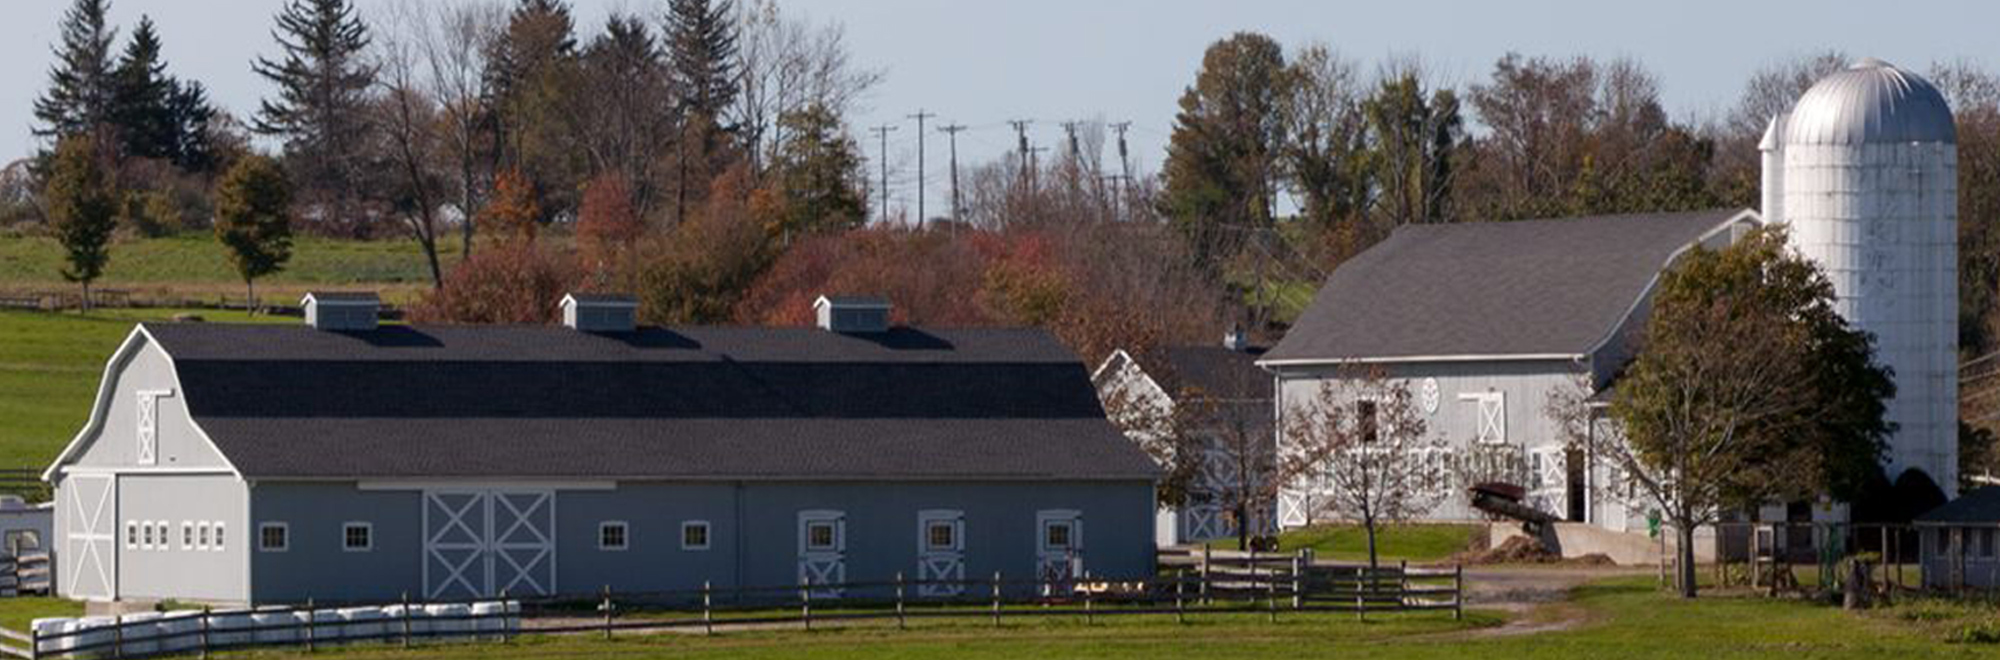 banner image of a farm house and barn